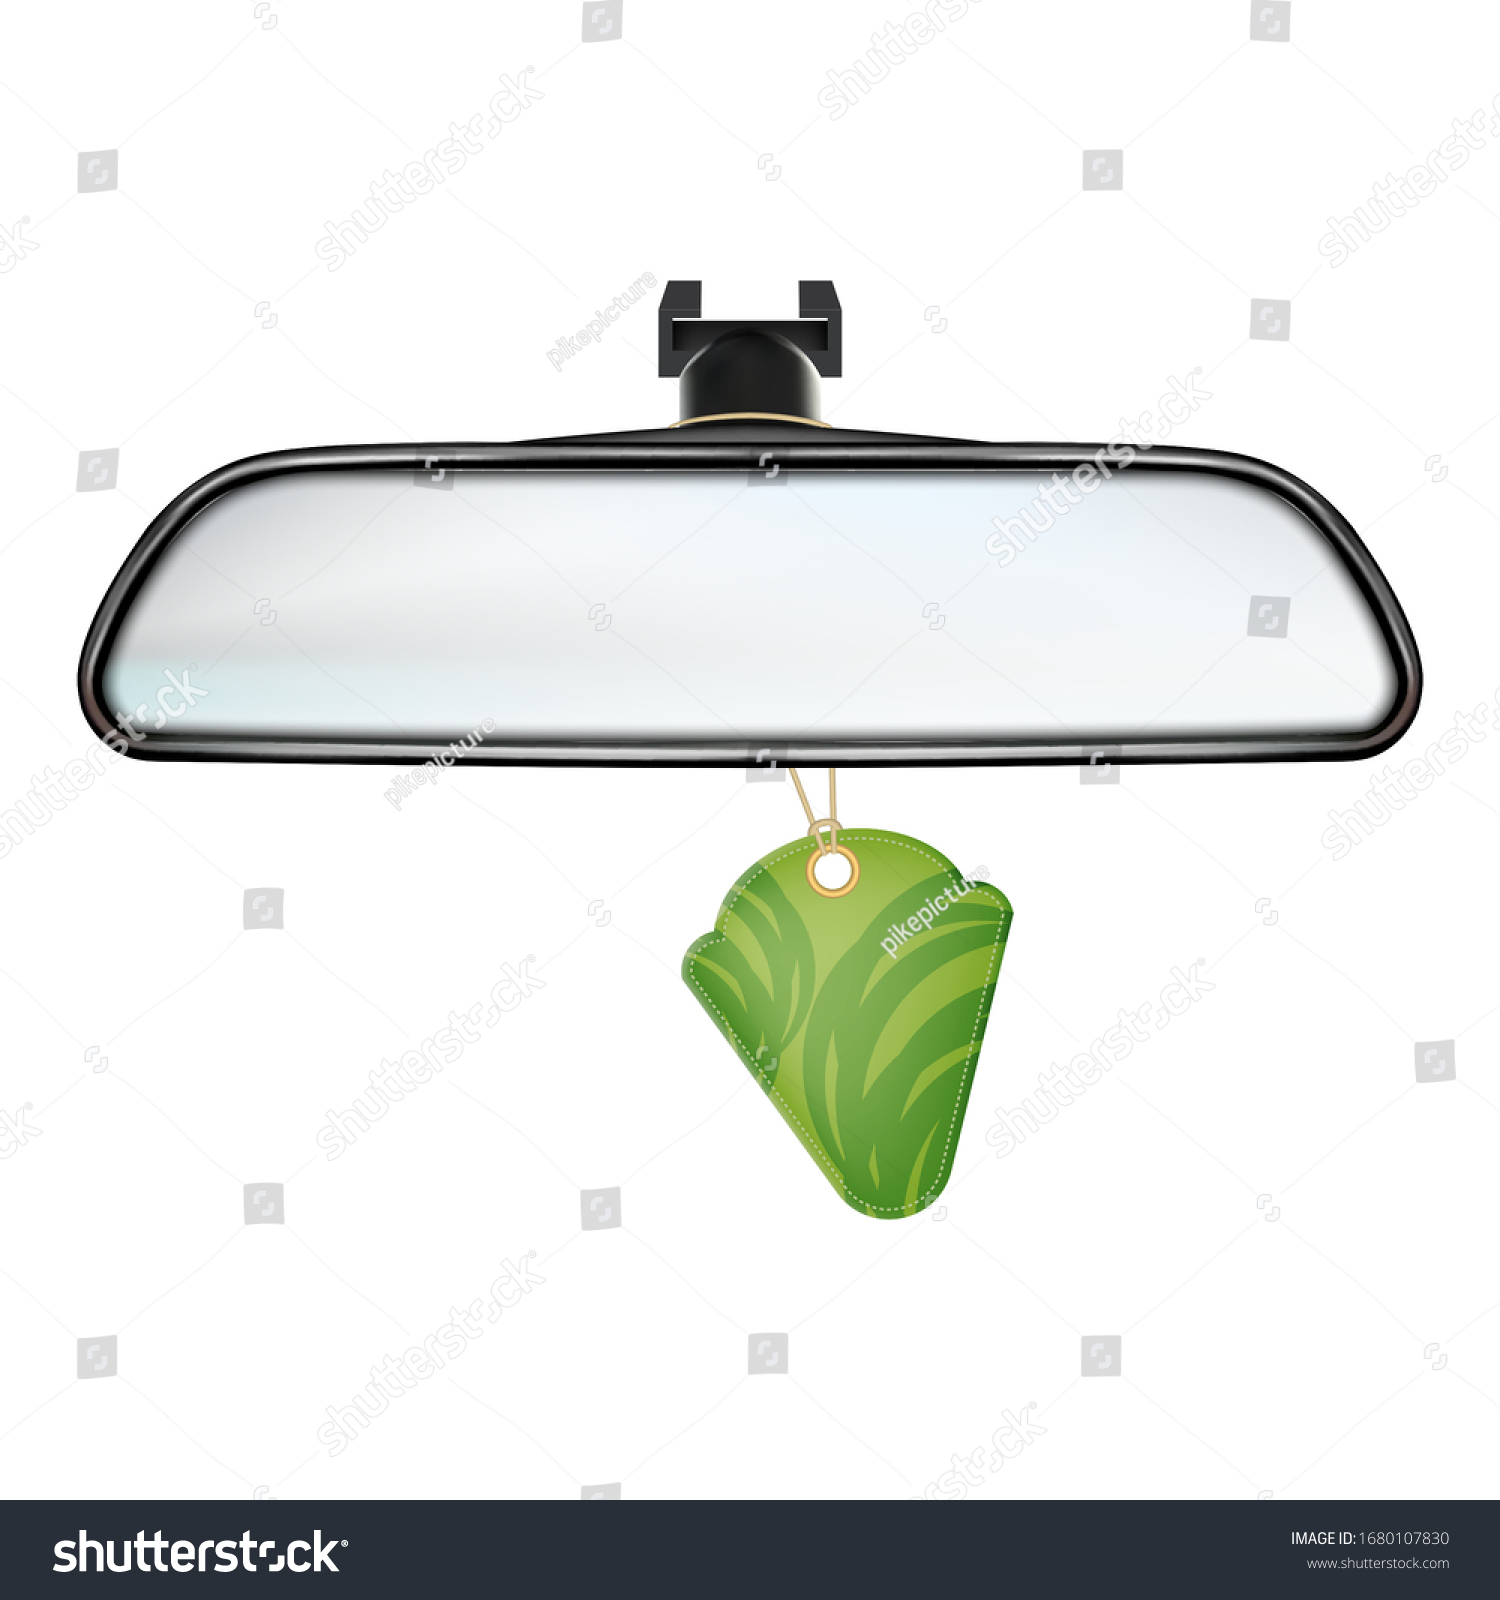 Car Rearview Mirror With Air Freshener Vector. Rear-view Mirror With Hanging Aromatic Flavor Perfume Accessory. Automobile Equipment For Safety Parking Template Realistic 3d Illustration #1680107830